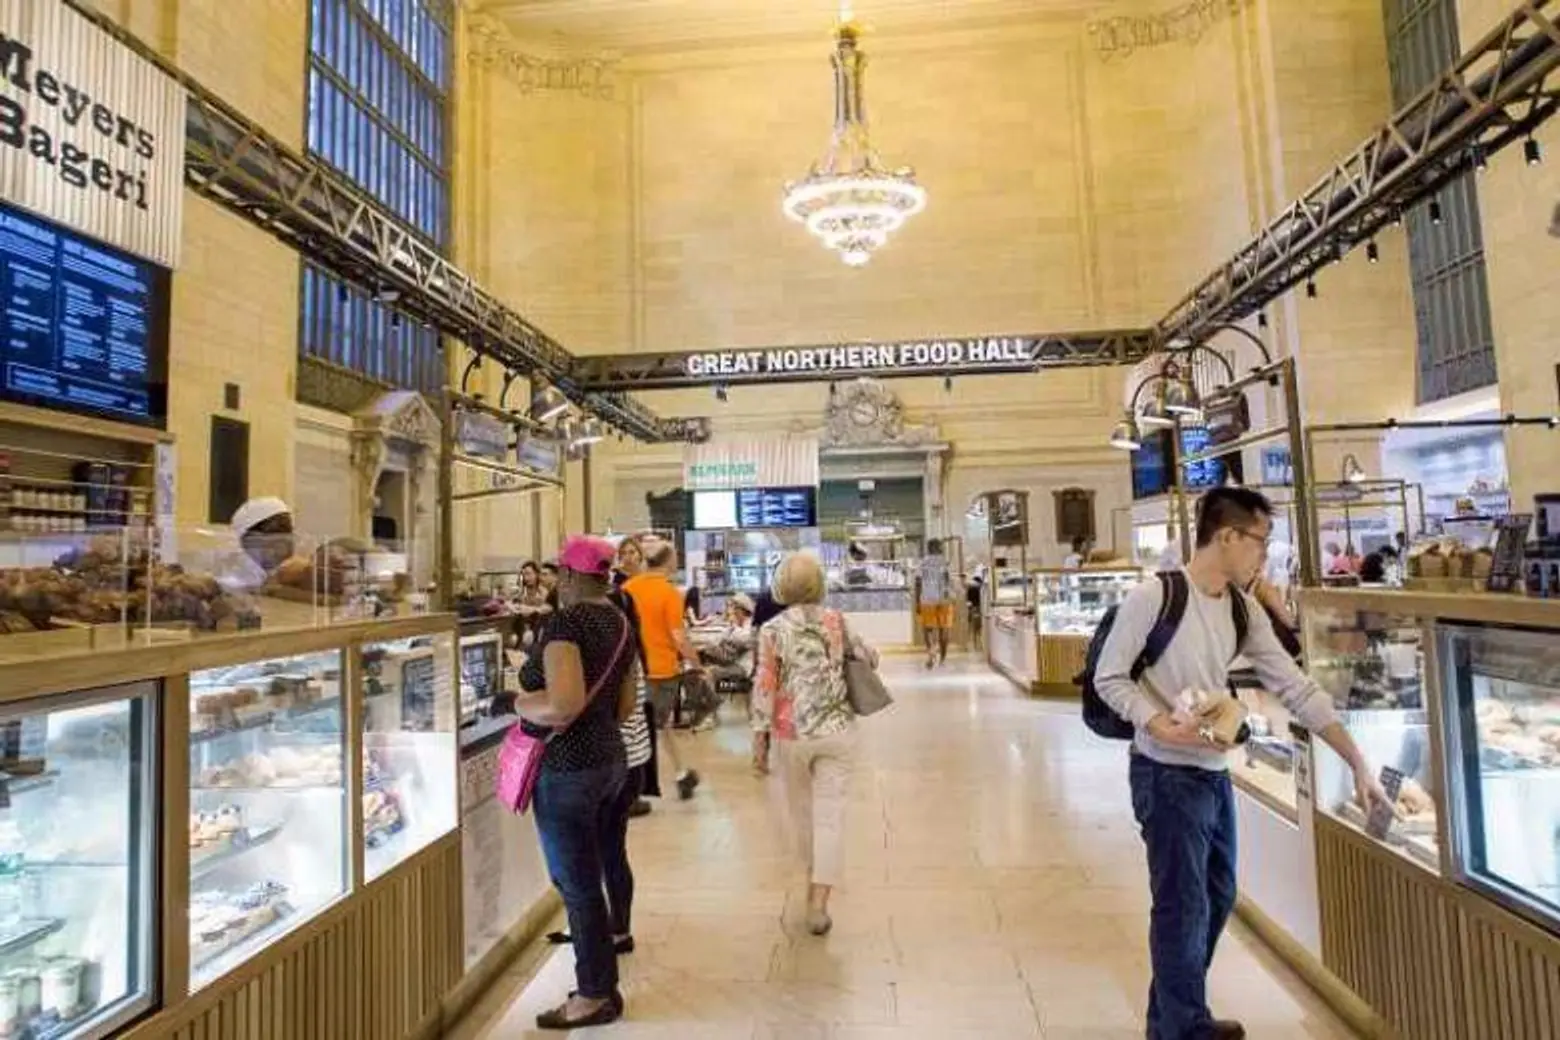 great northern food hall, grand central terminal, food halls nyc